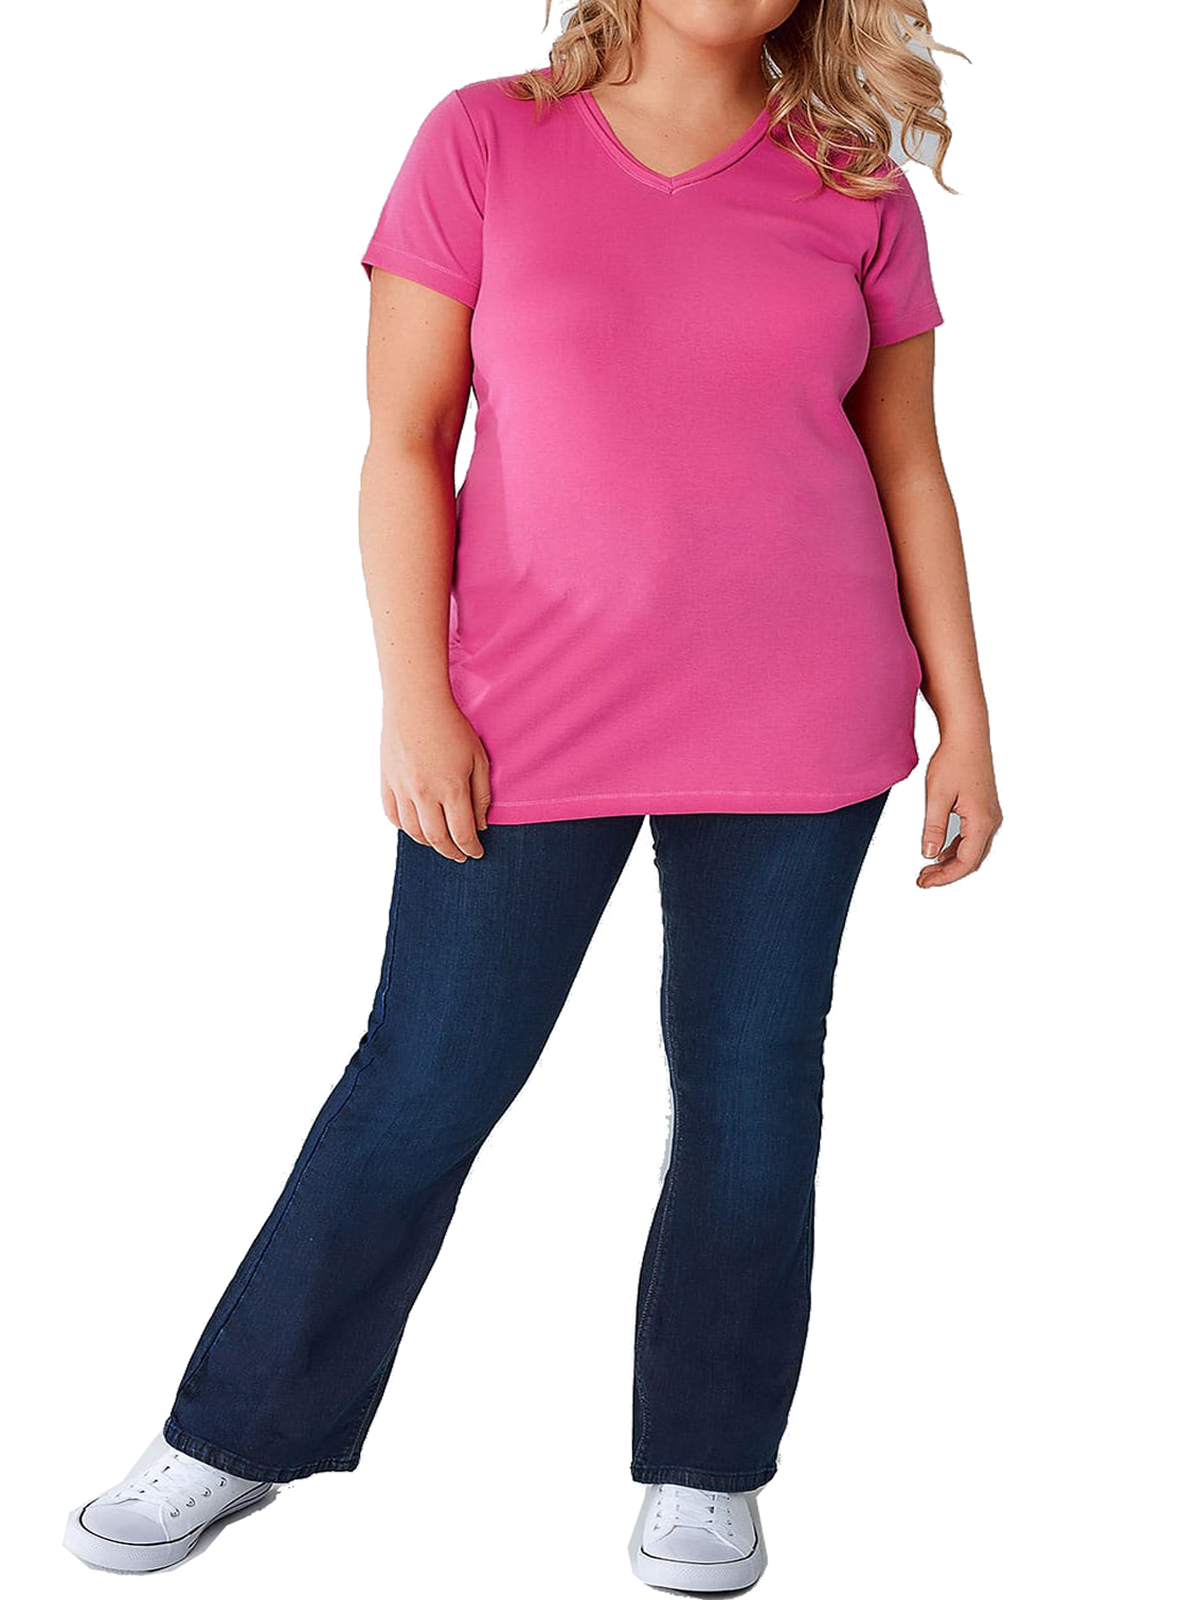 CURVE - - Yours FUCHSIA-PINK Pure Cotton Ribbed V-Neck T-Shirt - Plus ...